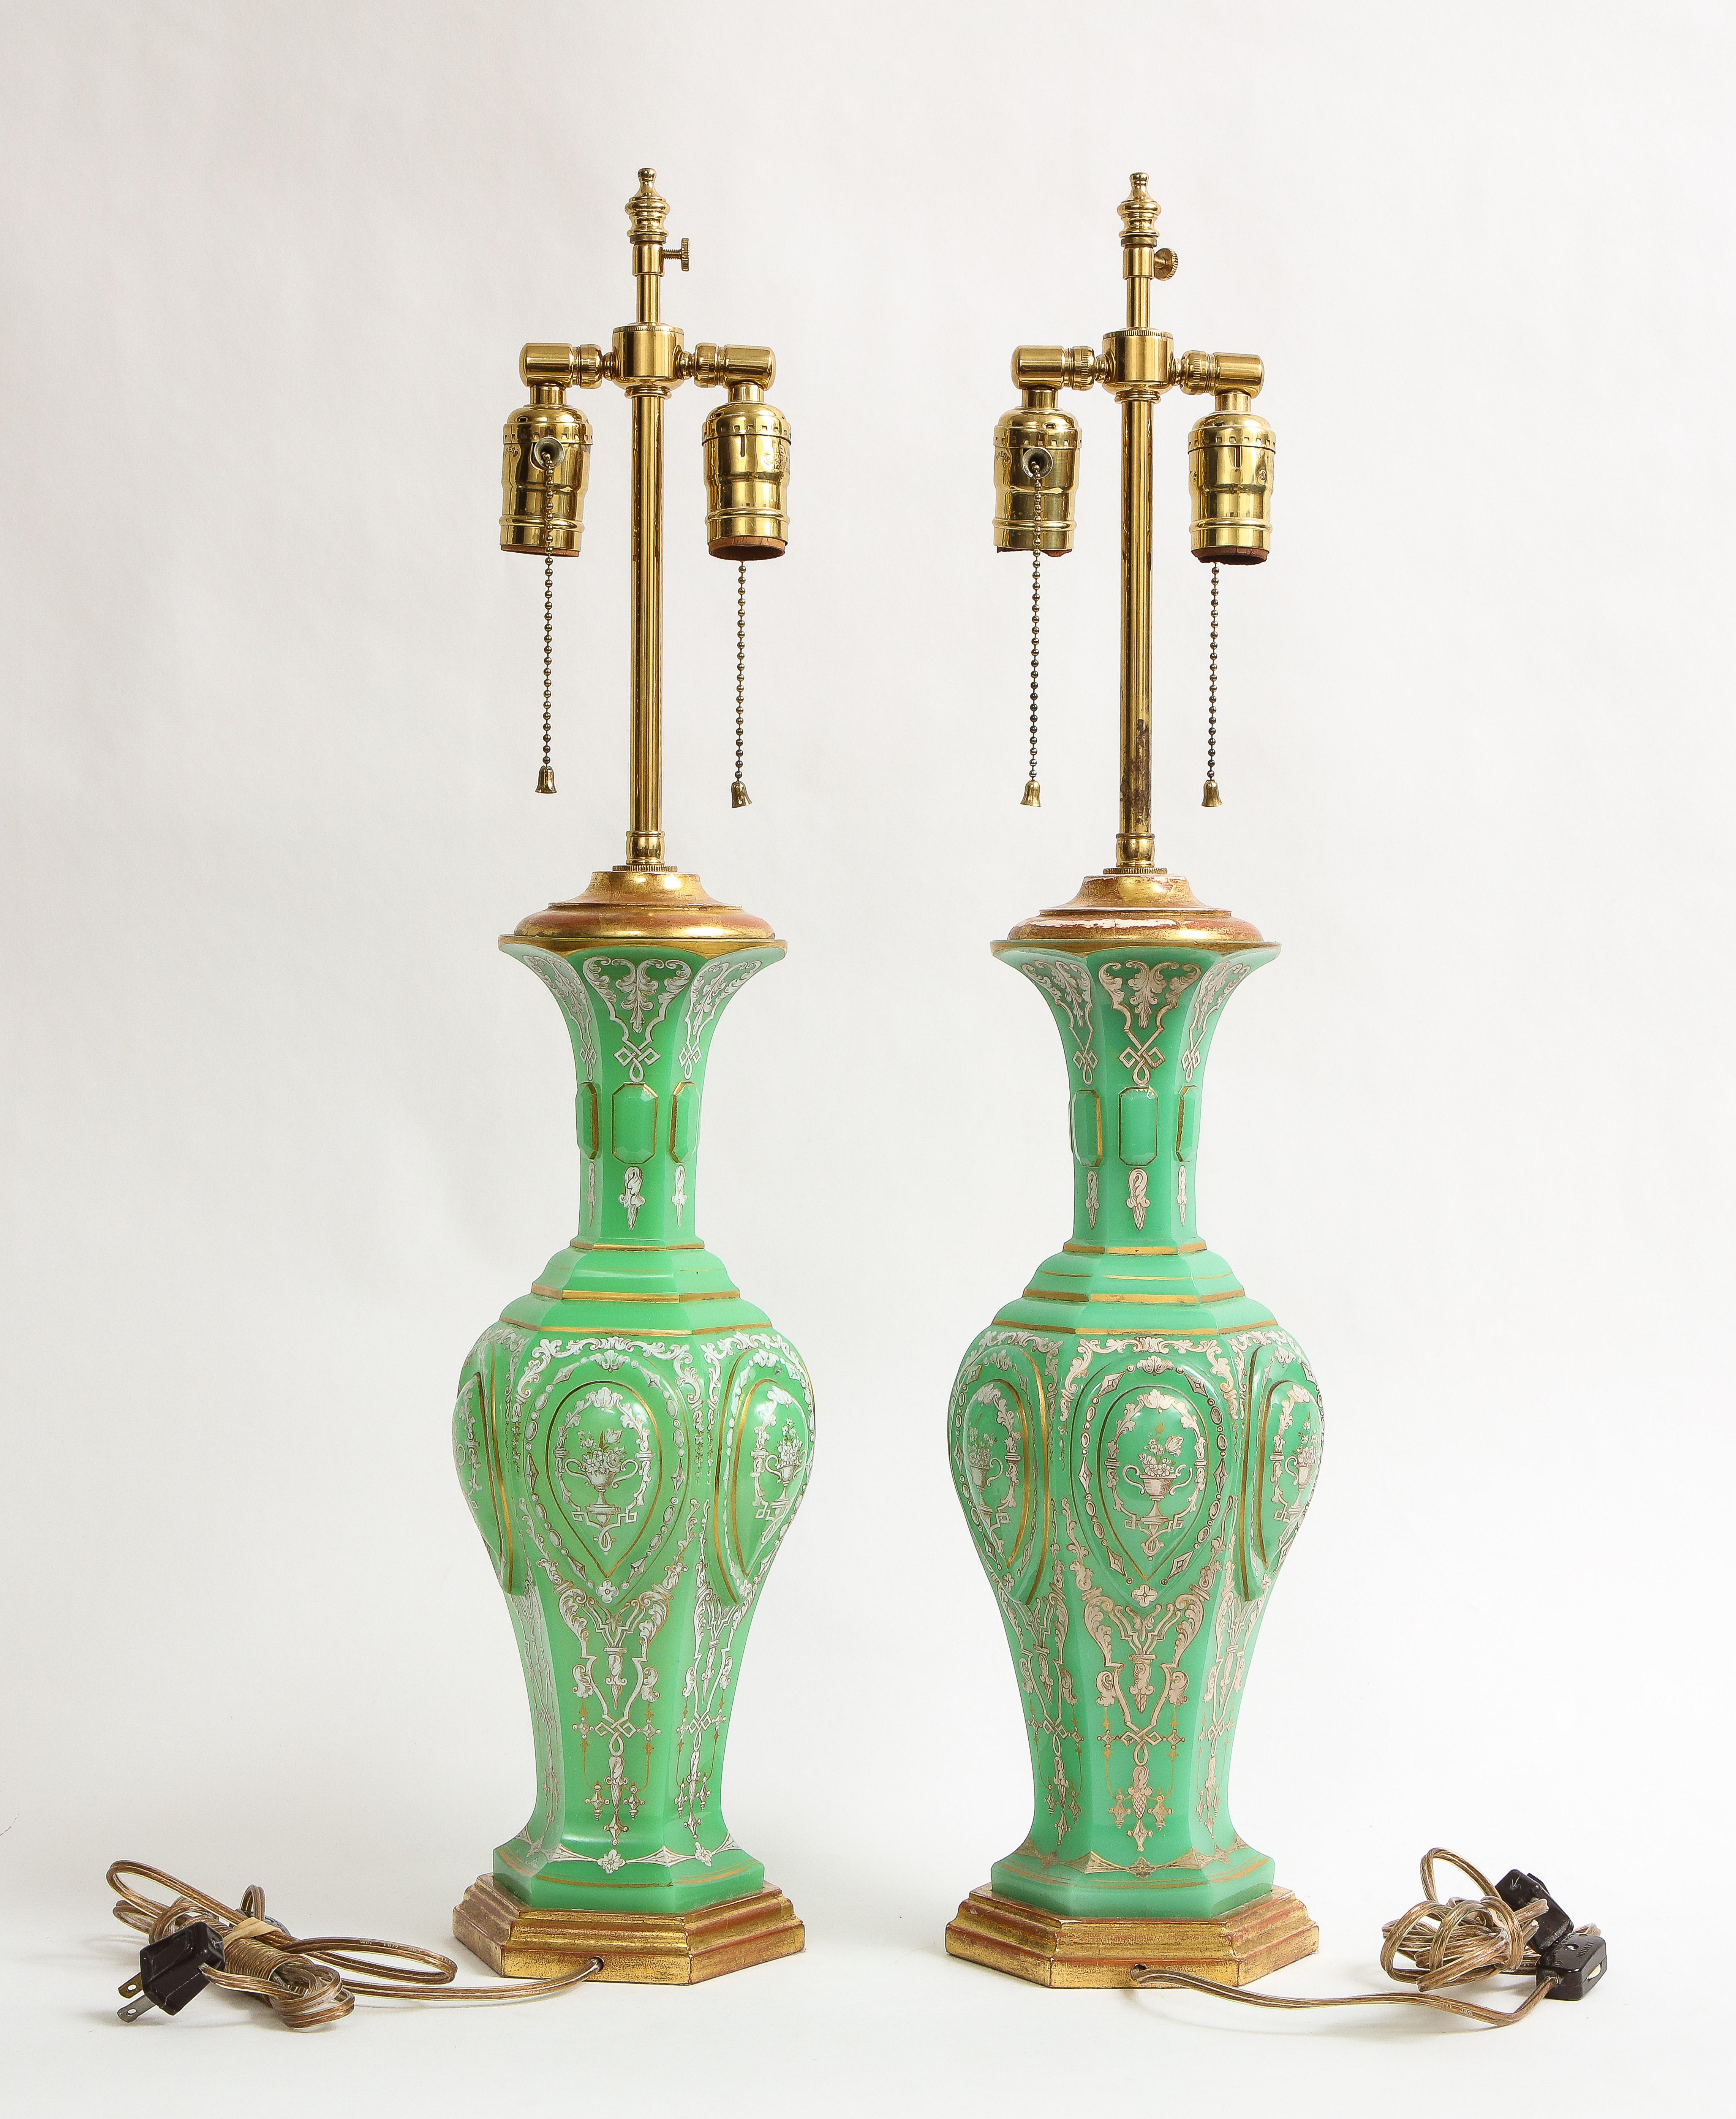 Pair of 19th C. French Giltwood Emerald Green Opaline Crystal and Enamel Lamps In Good Condition For Sale In New York, NY